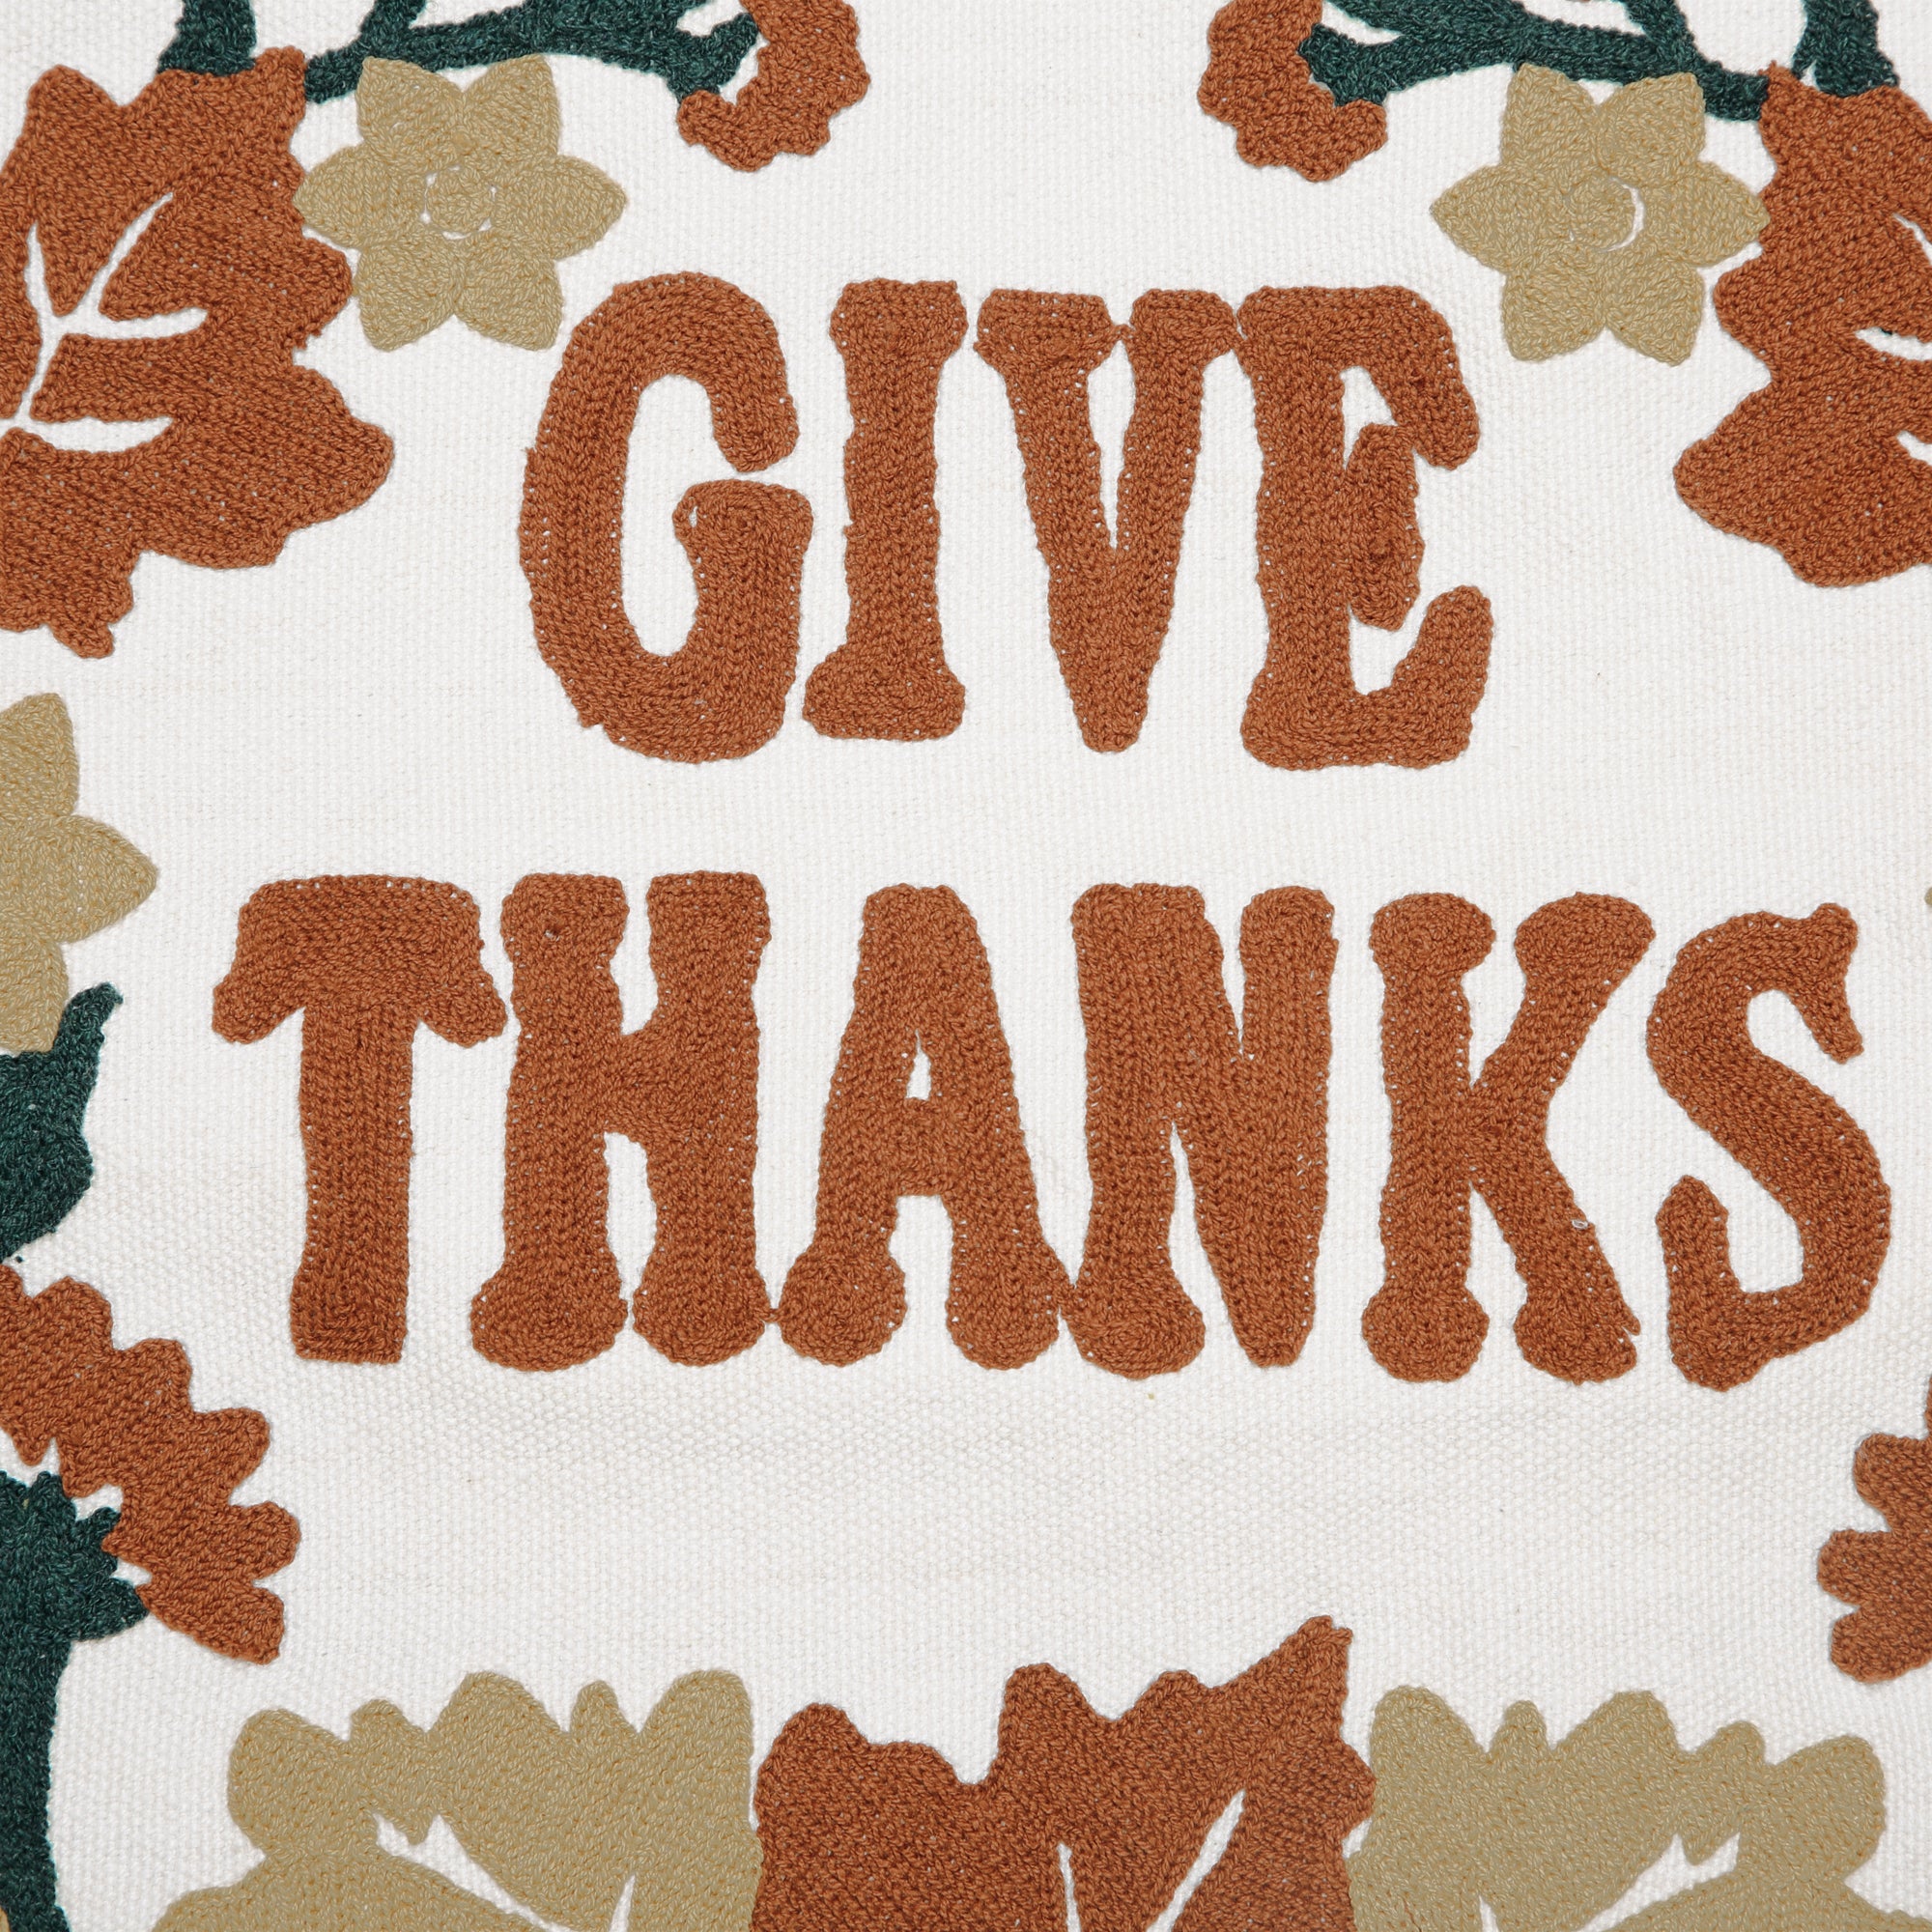 Wheat Plaid Give Thanks Pillow Cover 18x18 VHC Brands